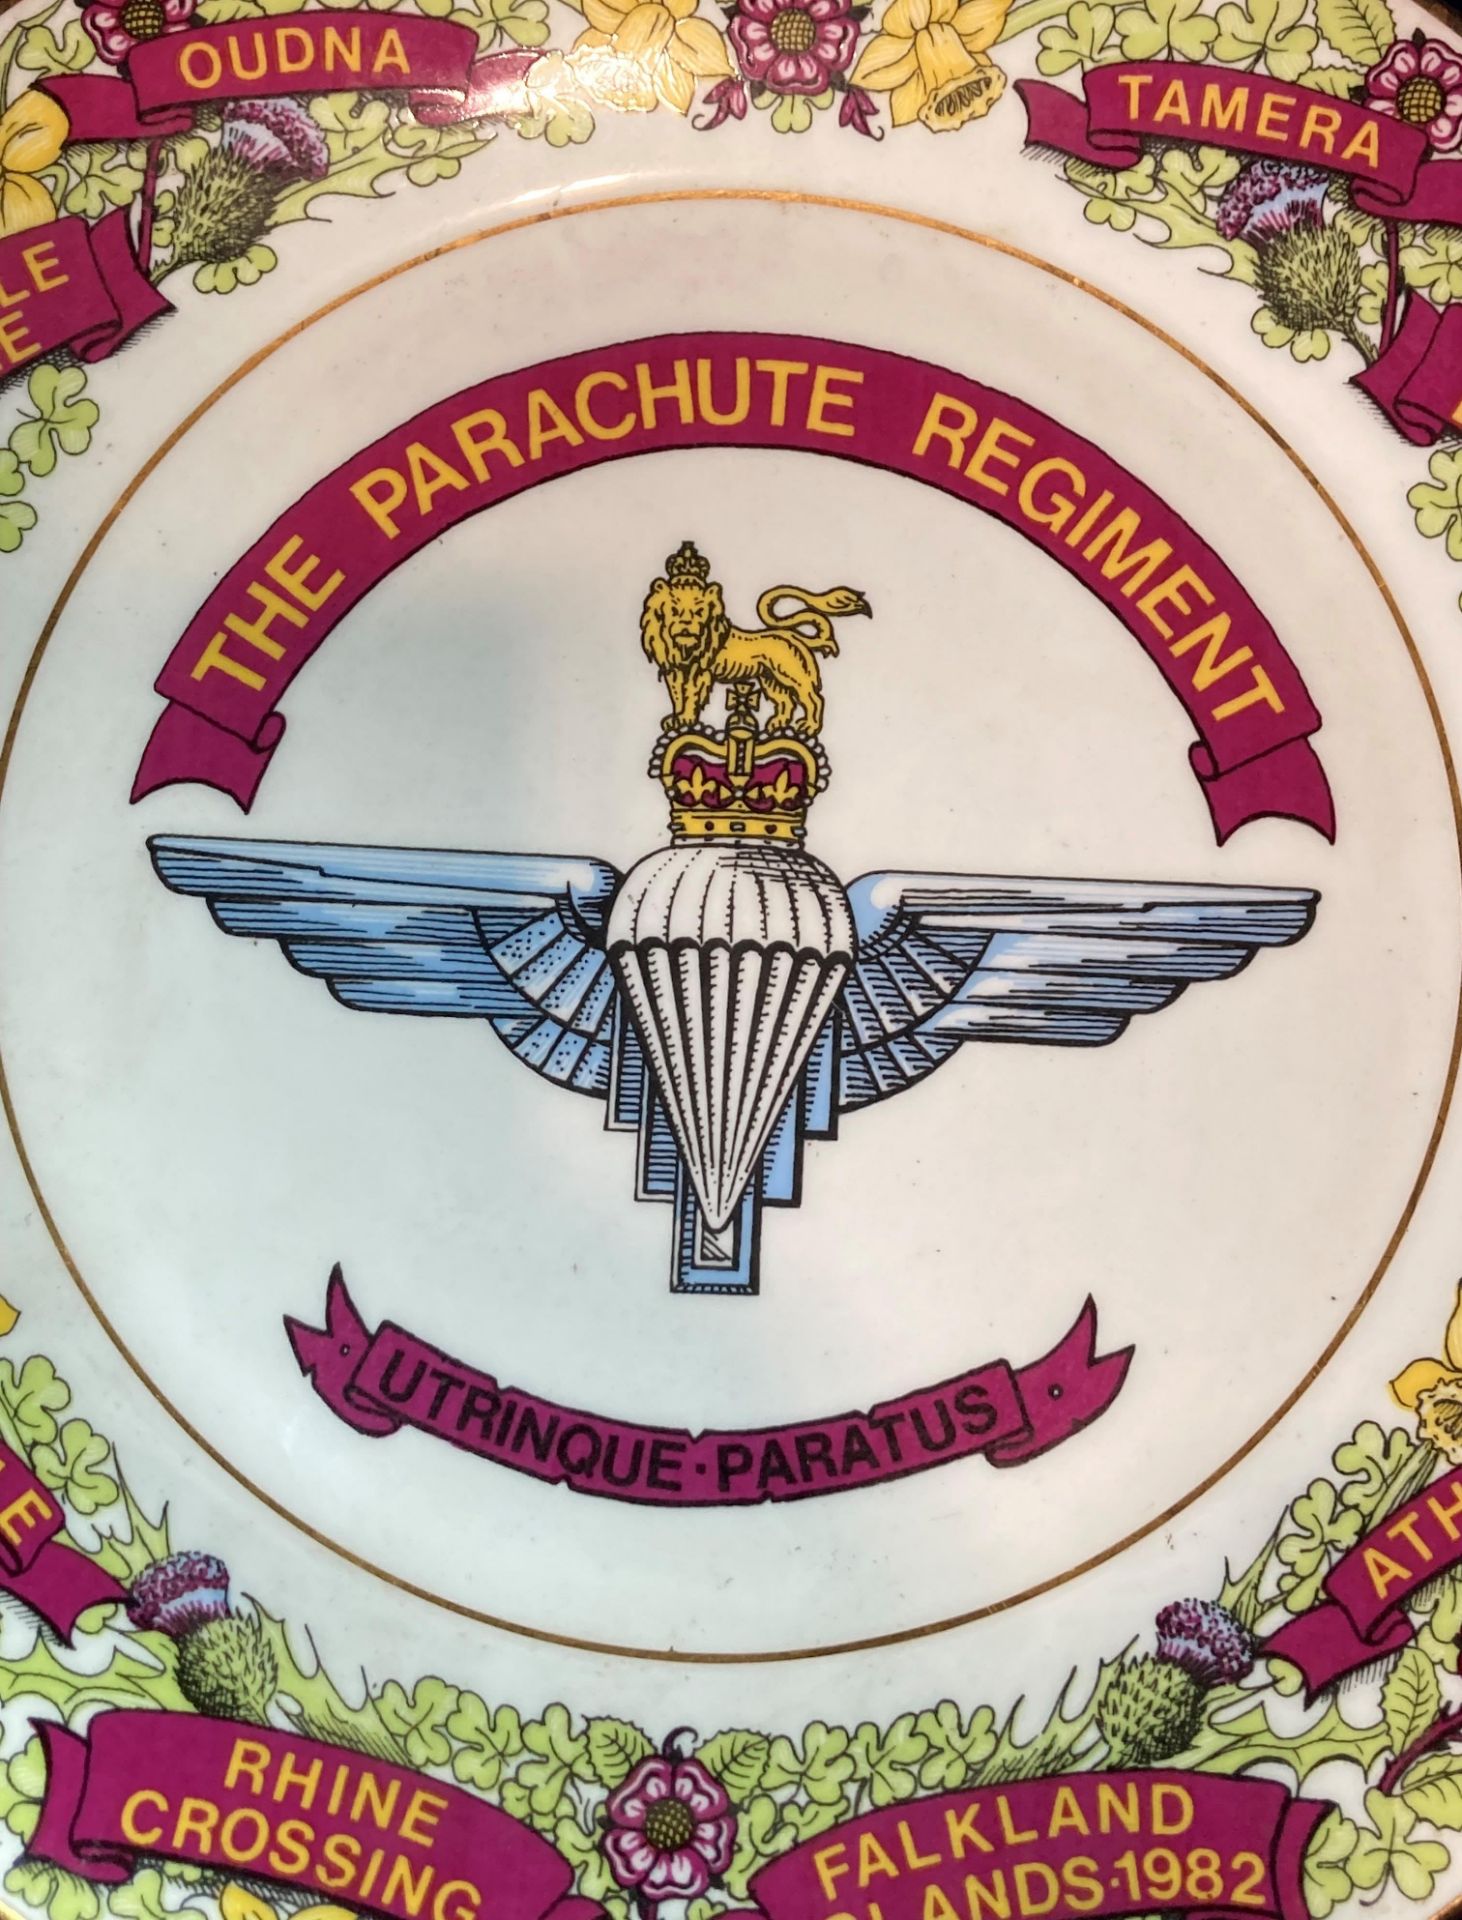 Edwardian fine bone china limited edition plate specially produced for the Parachute Regiment and - Image 2 of 3